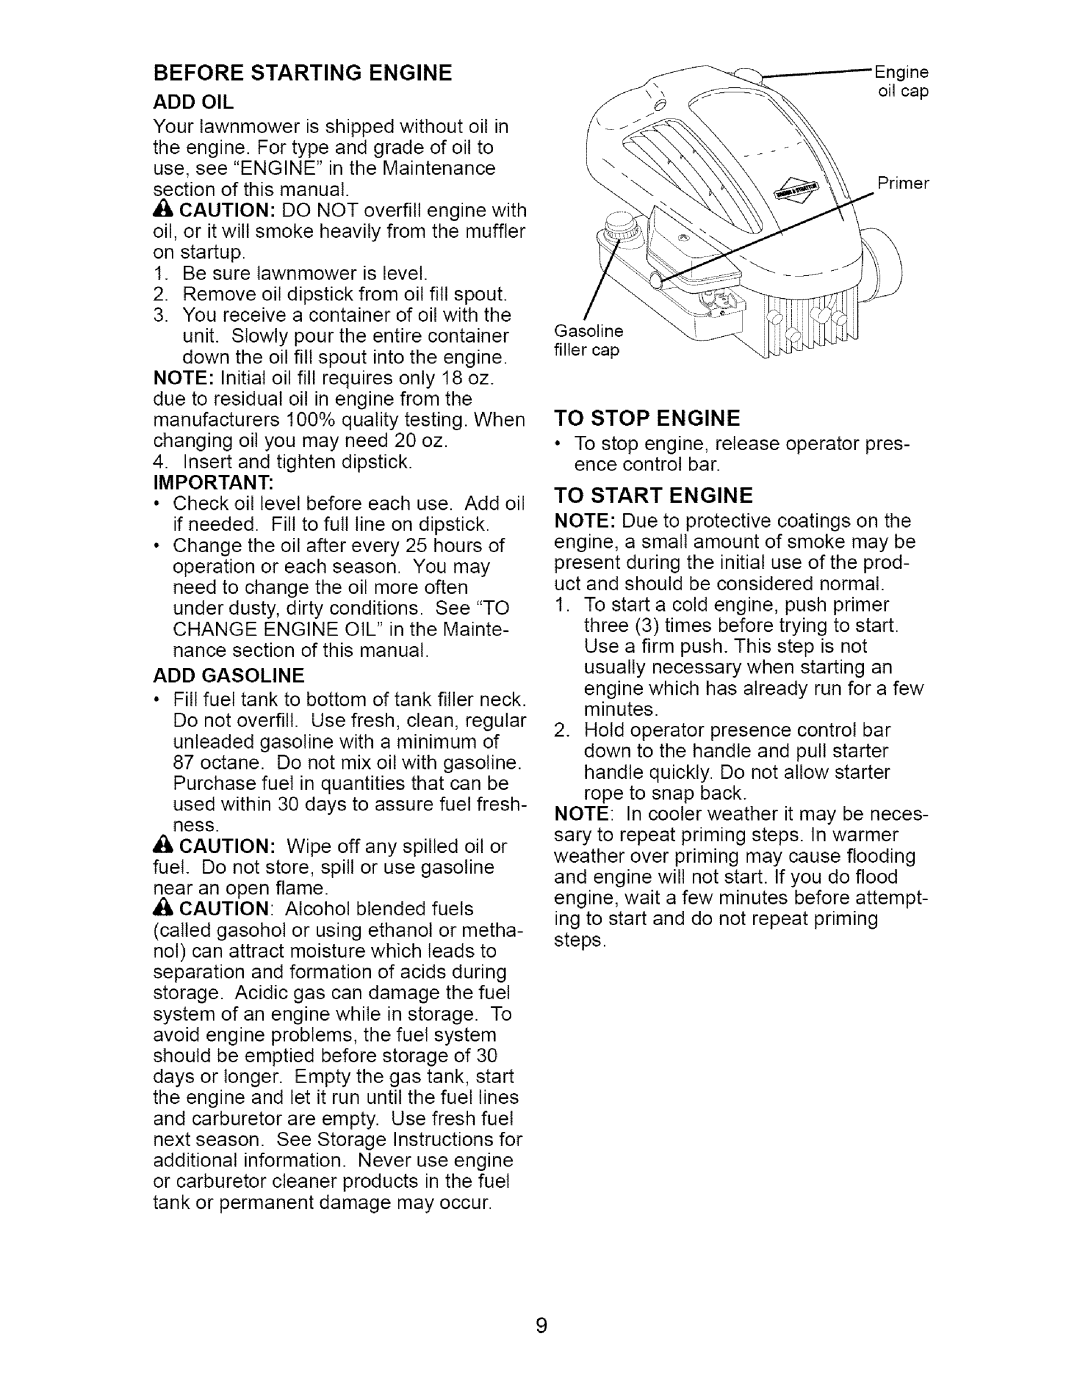 Craftsman 917.385140 owner manual Before Starting Engine, Add Oil, To Stop Engine, To Start Engine 